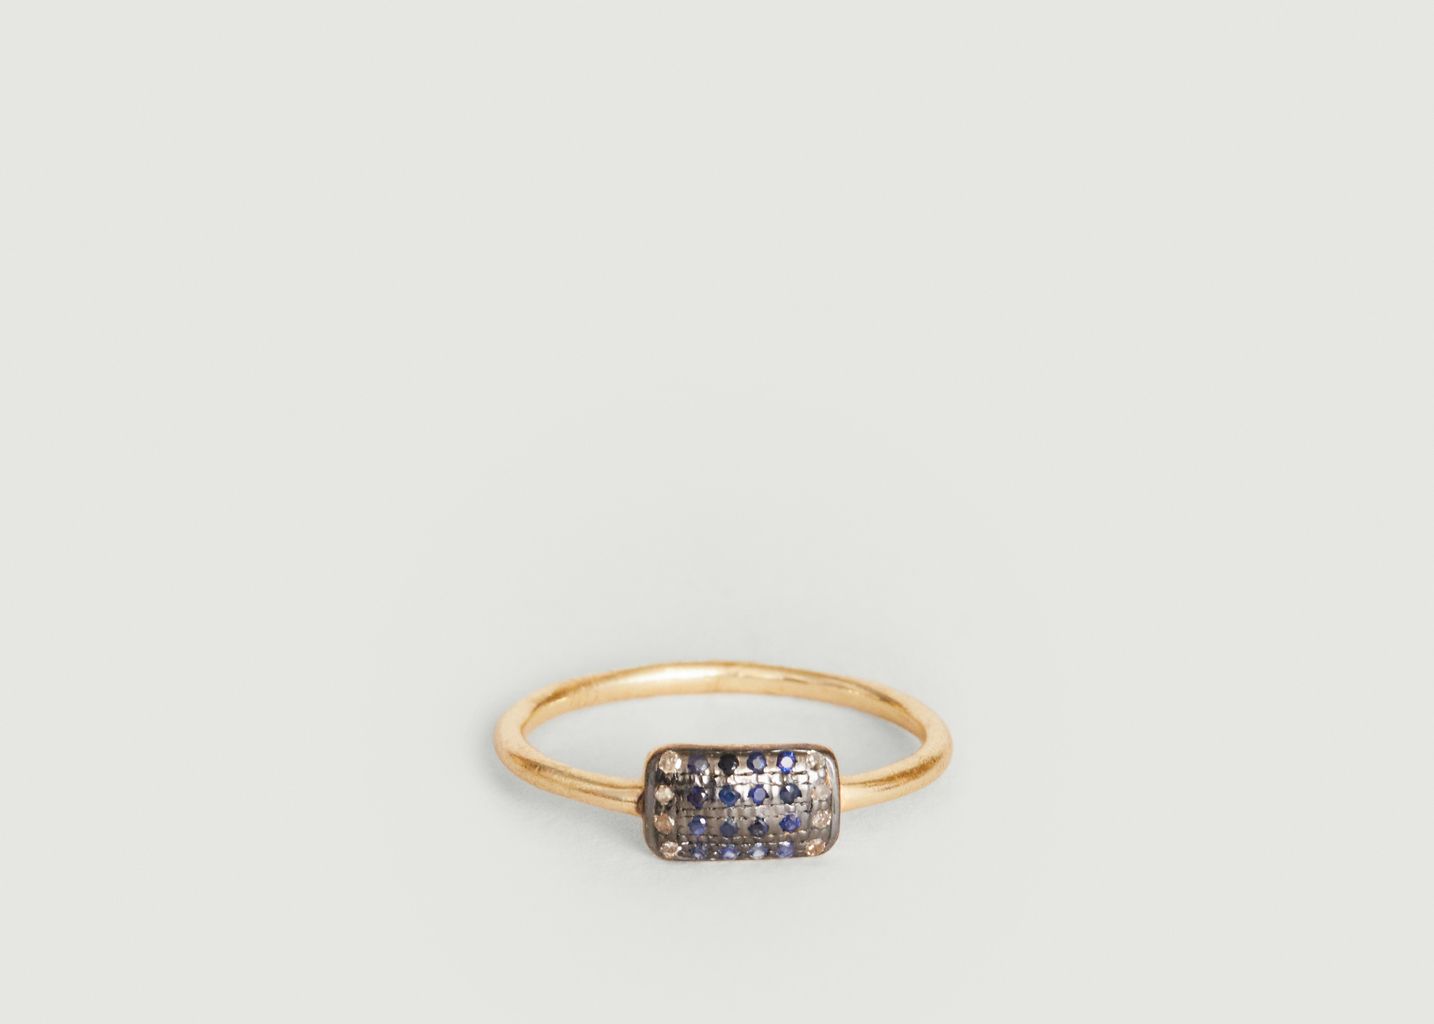 Rem ring in silver gilded with 24 carat gold - 5 Octobre